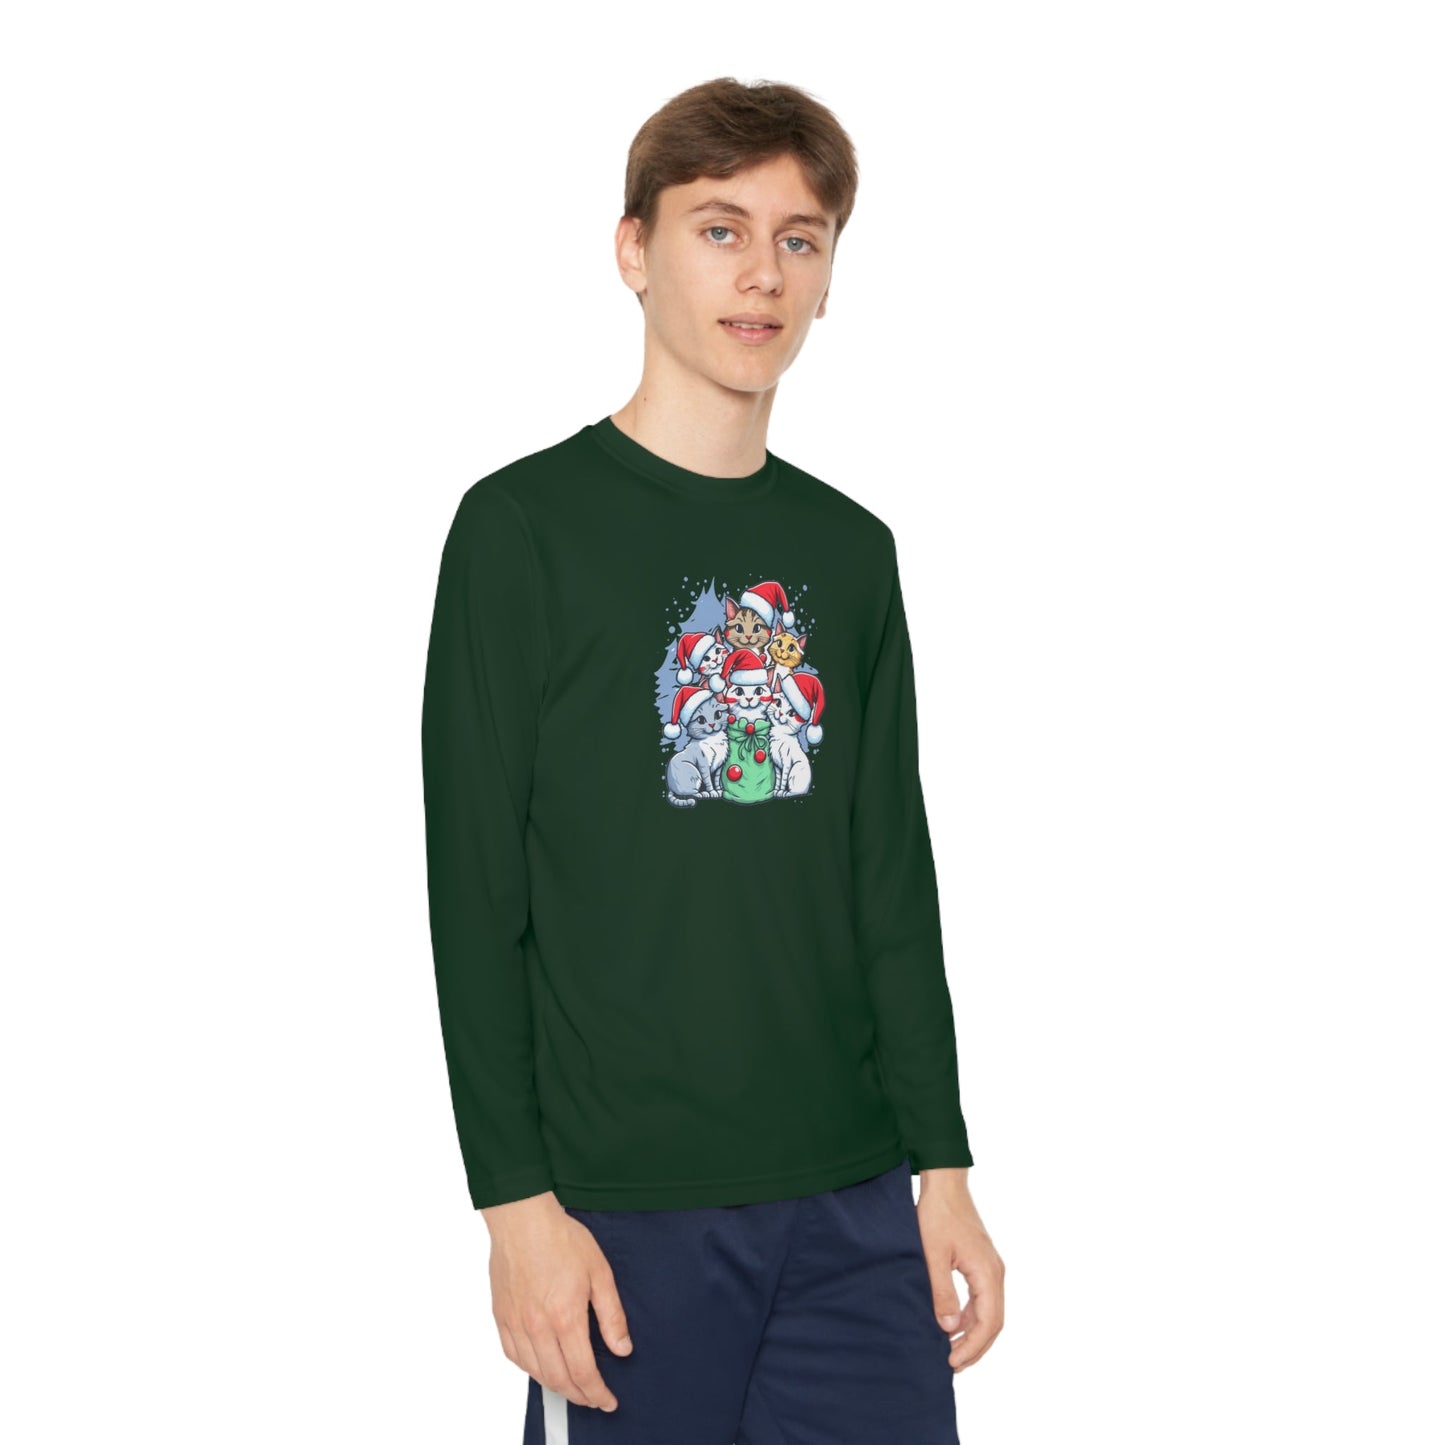 Christmas Kitties Youth Long Sleeve Competitor Tee - Kids clothes - Epileptic Al’s Shop